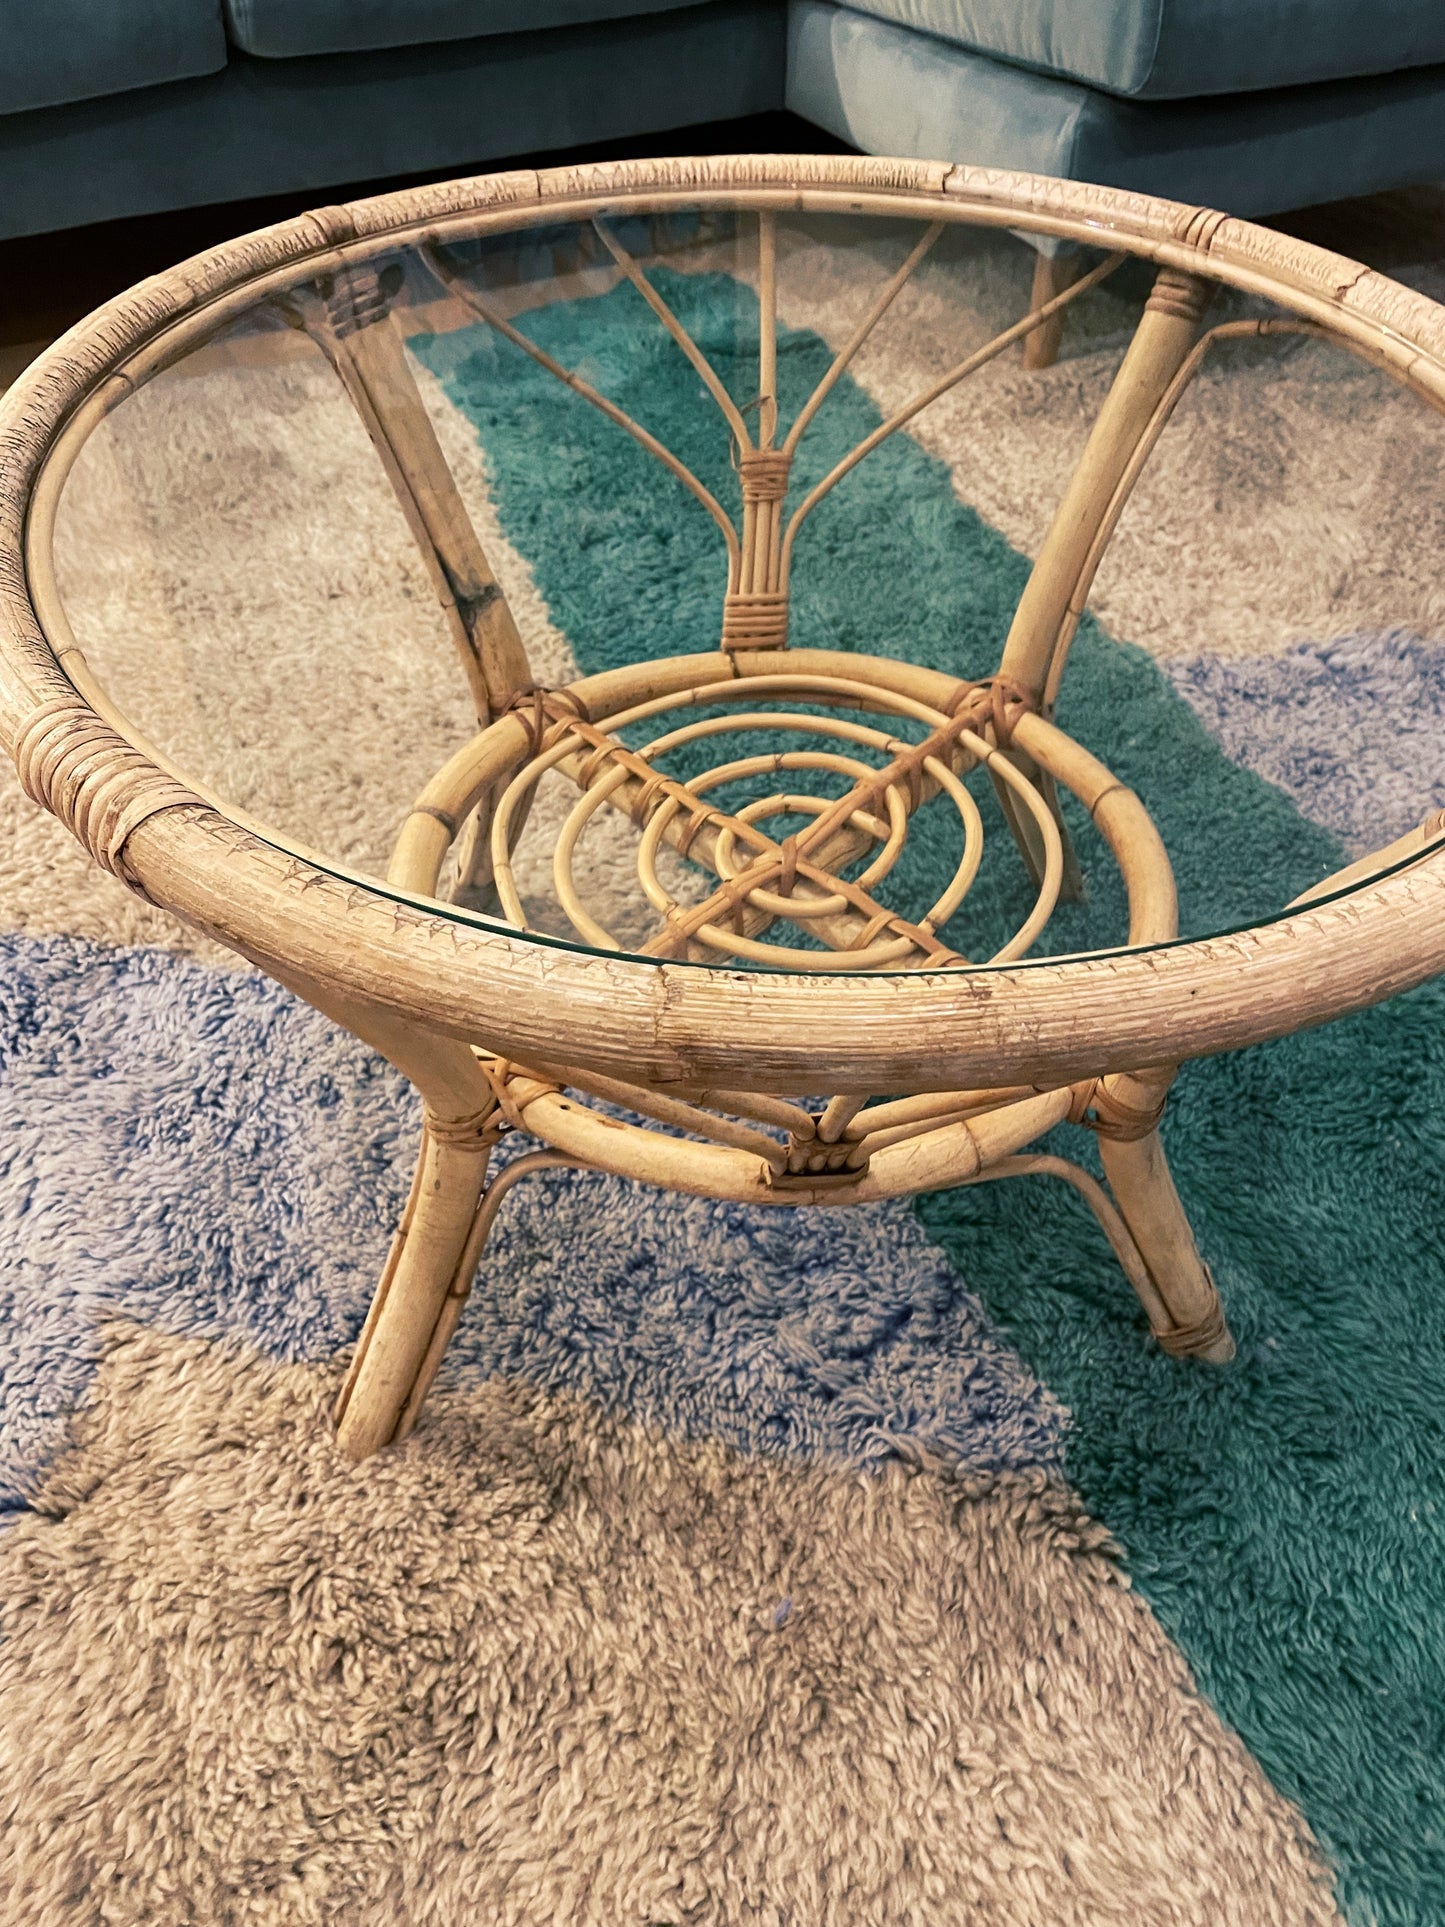 Vintage Bamboo Coffee Table